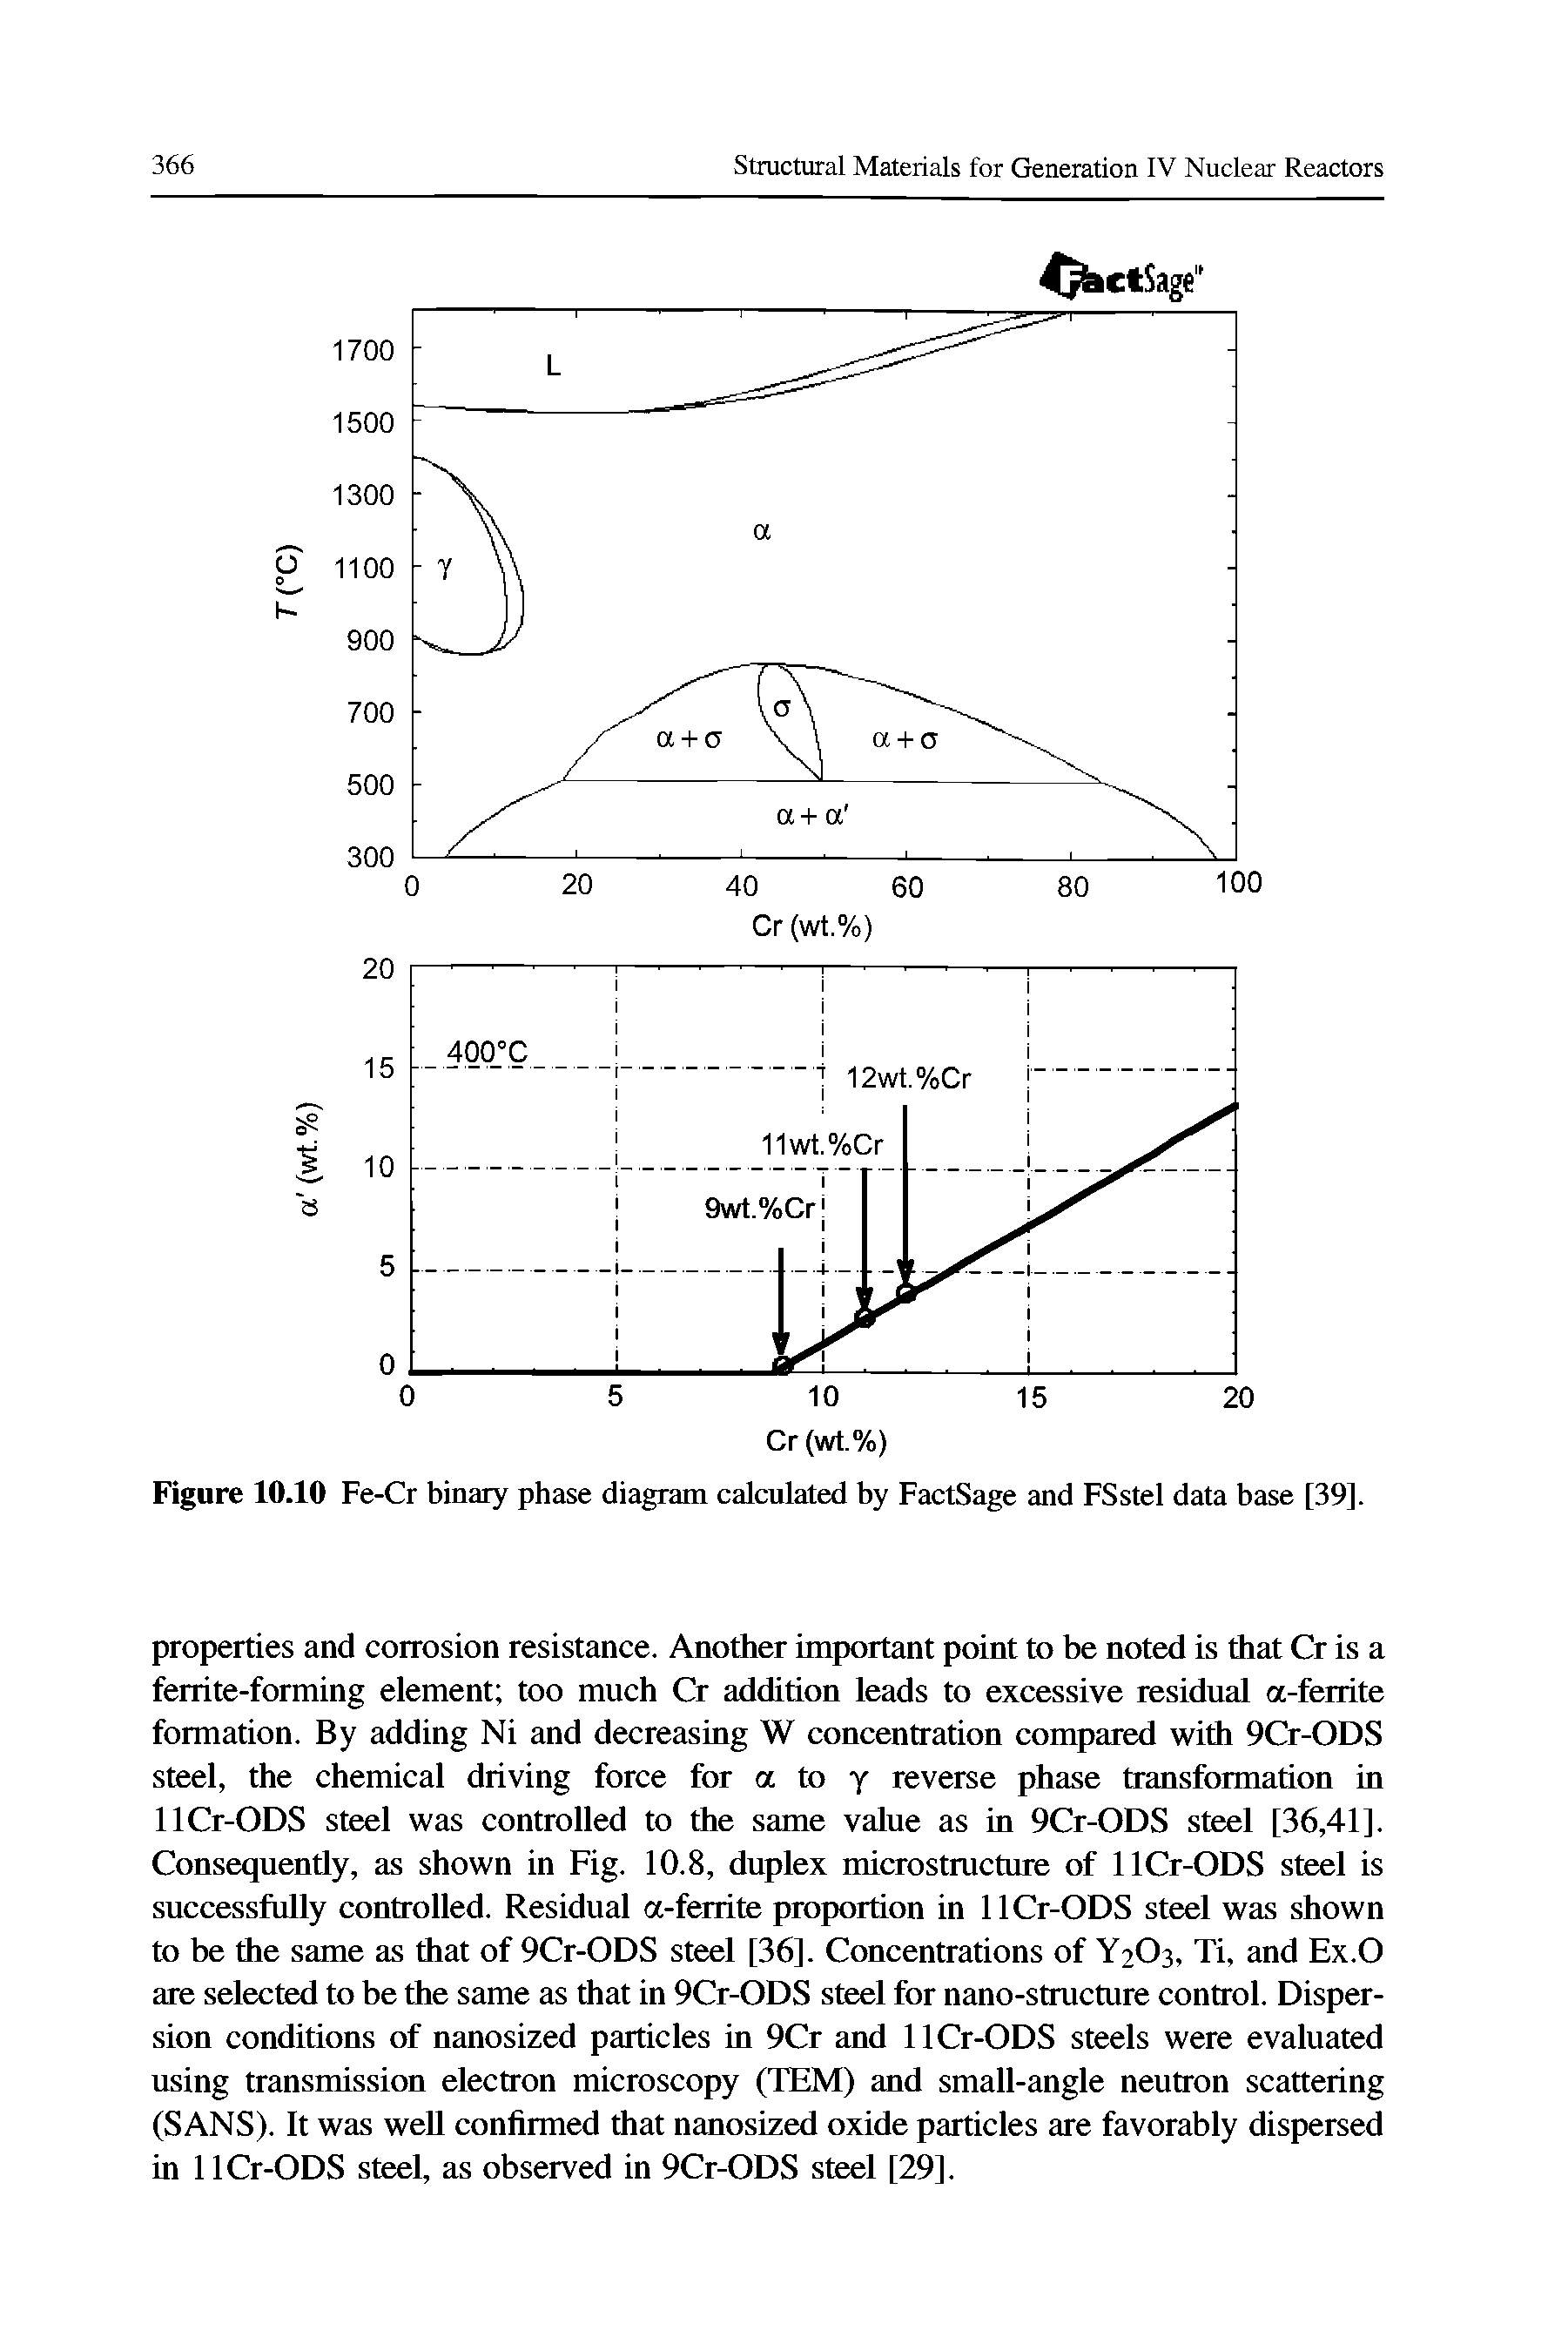 Figure 10.10 Fe-Cr binary phase diagram calculated by FactSage and FSstel data base [39].